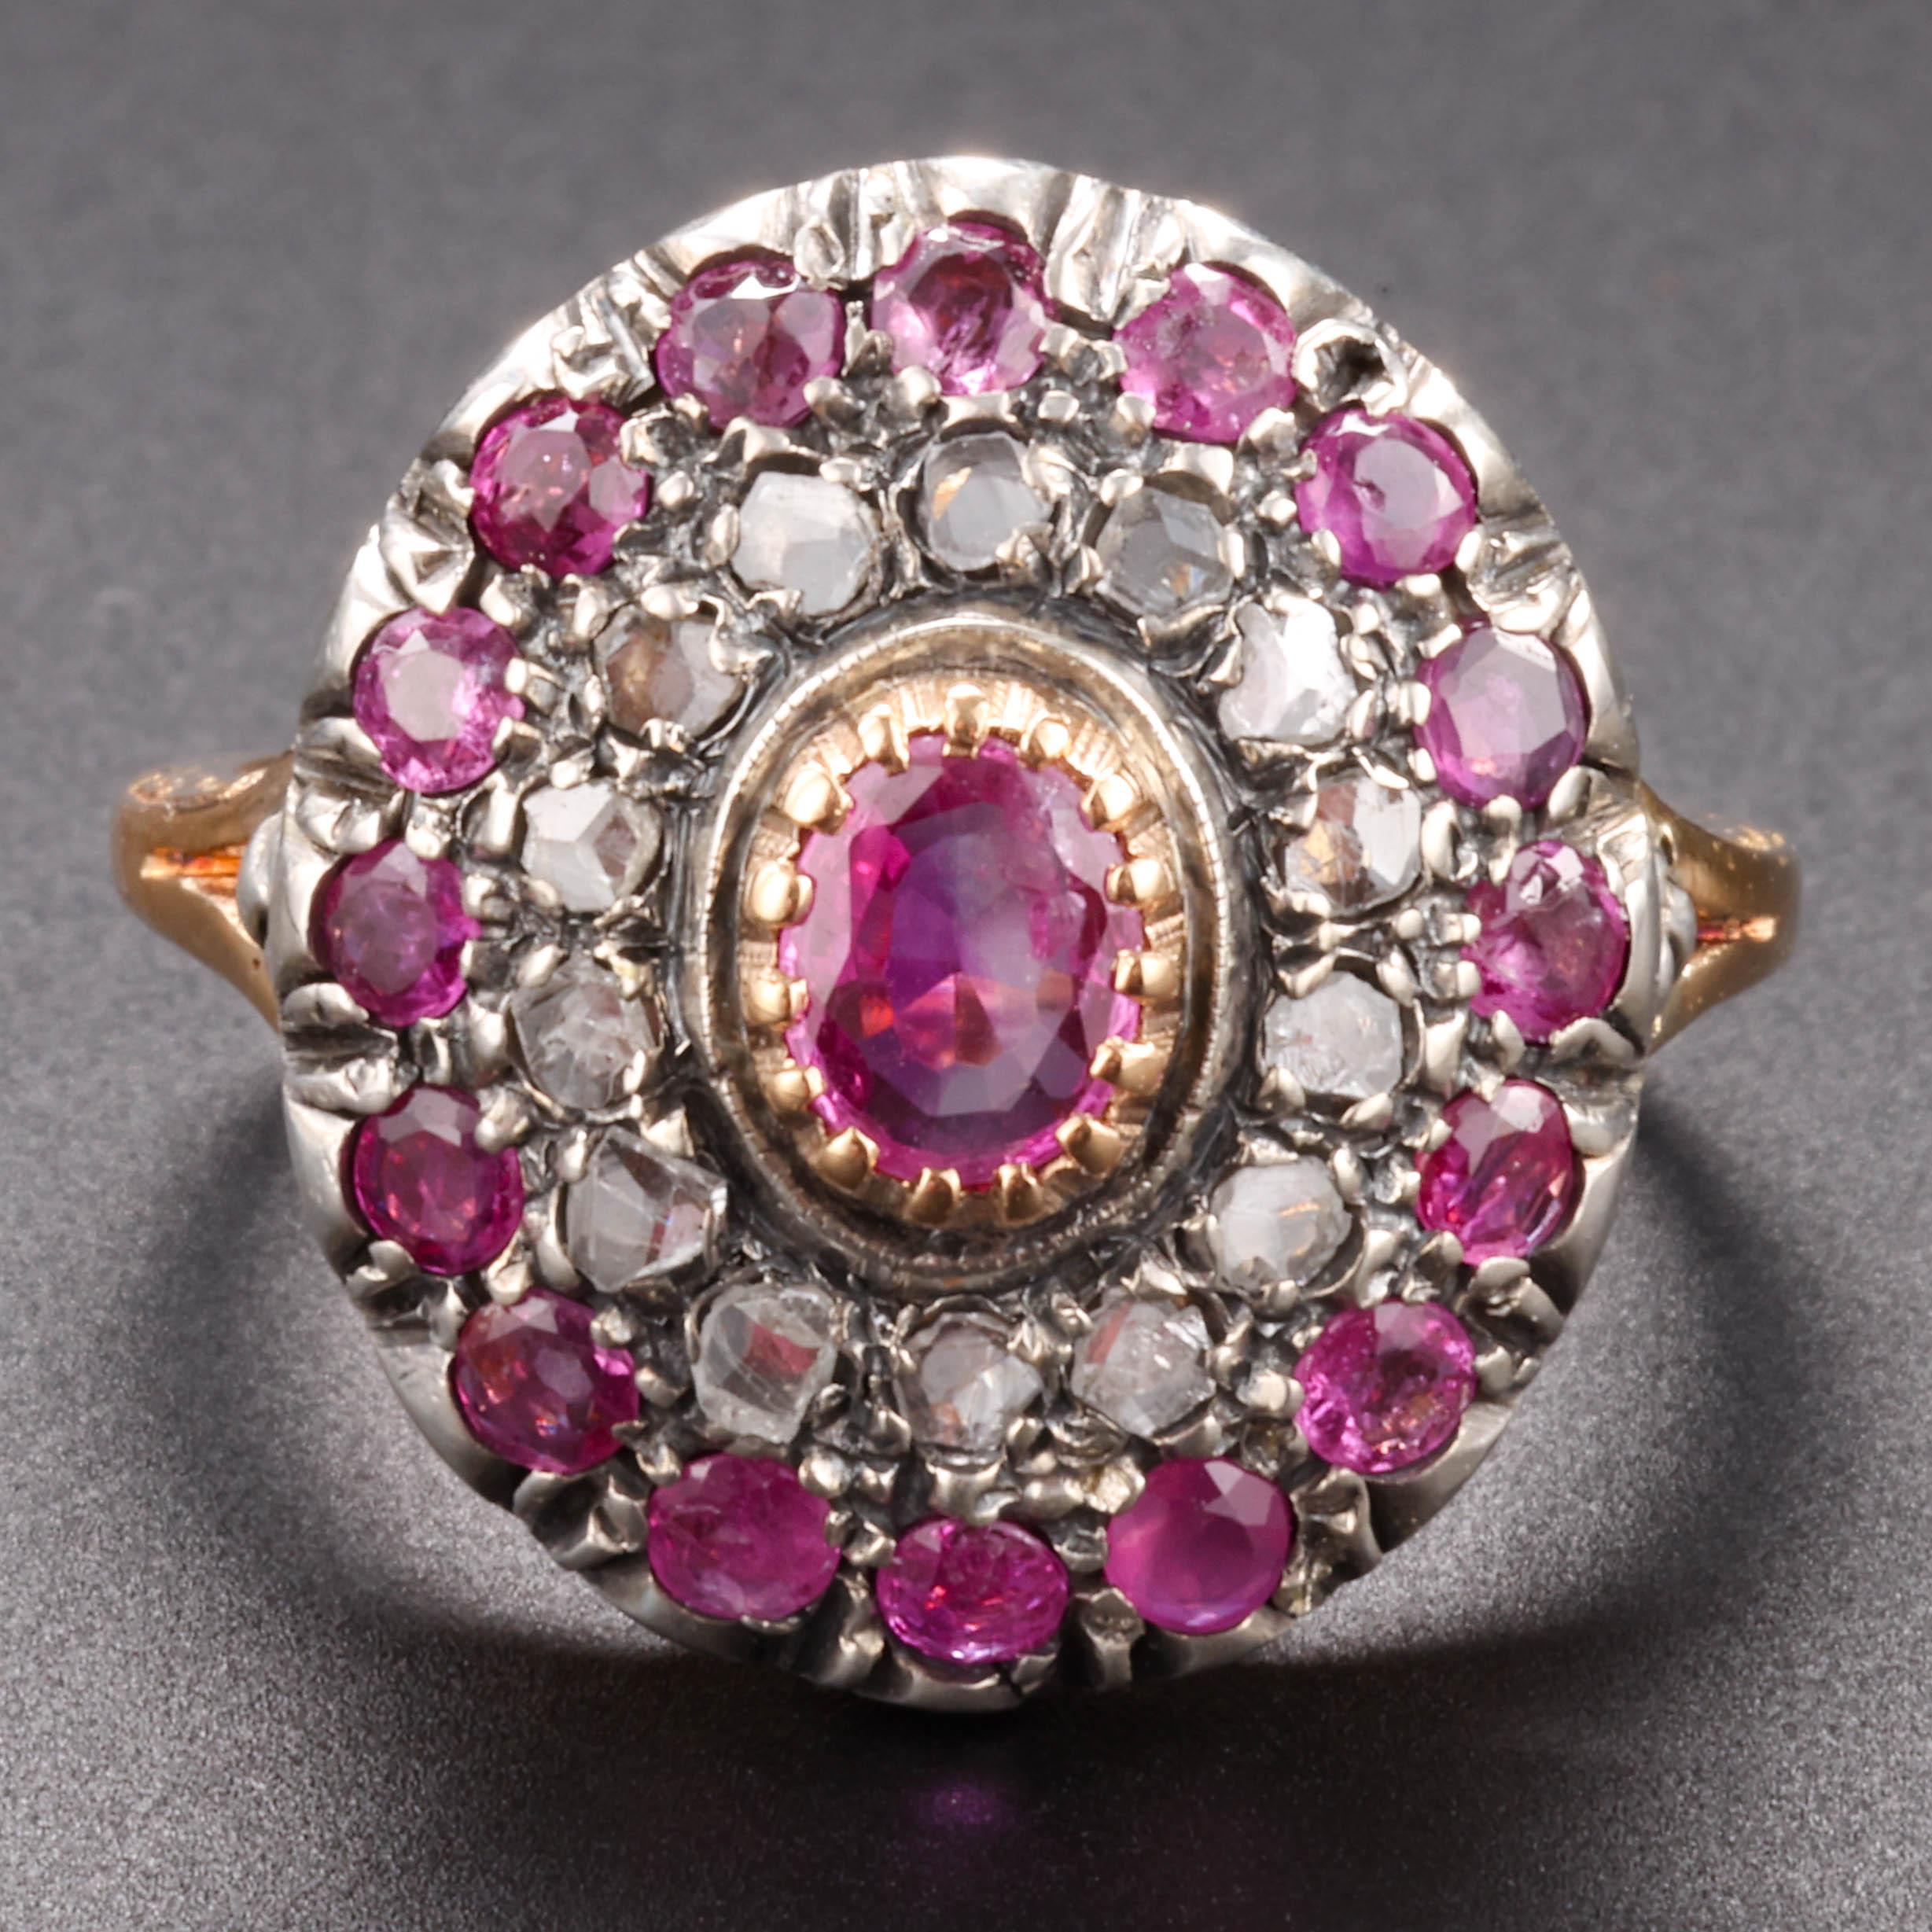 Natural, unheated Burmese pink sapphires and a halo of single-cut diamonds surround a central oval pink sapphire in this late Victorian ring. 

Crafted in 18K gold, the gems are set in silver atop gold, as was common in the era. The ring has strong